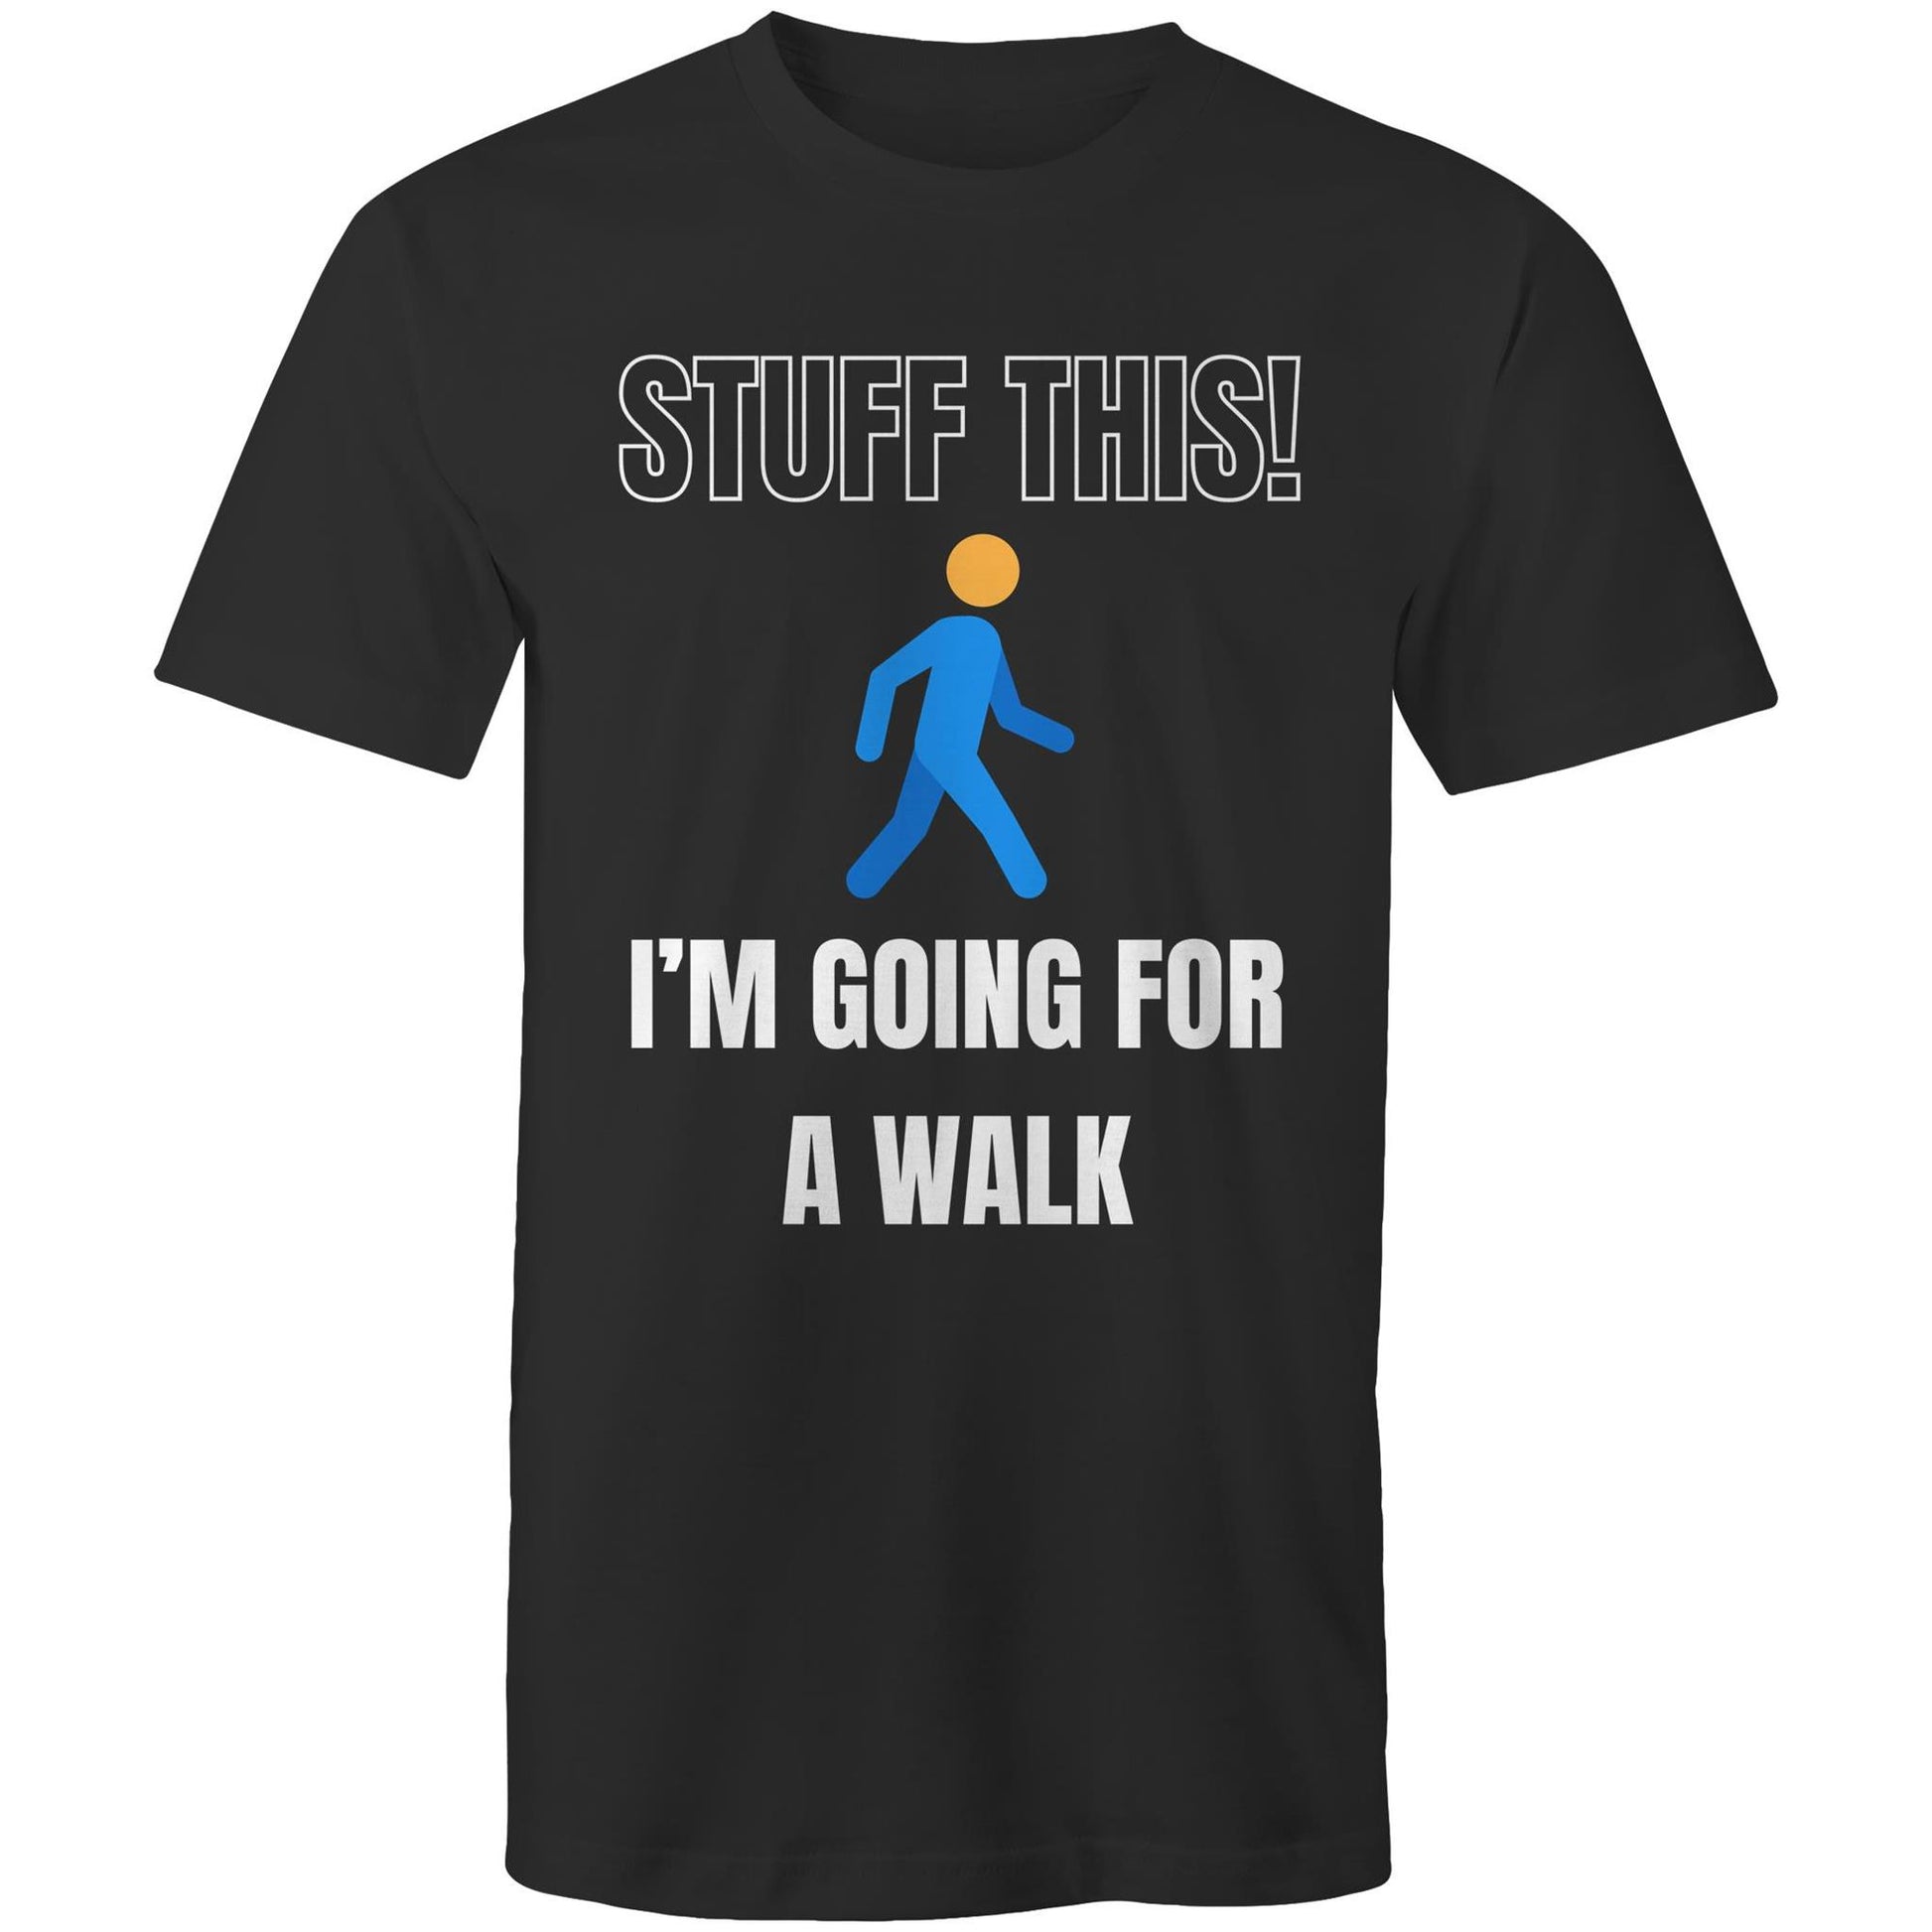 Stuff this I'm going for a walk T Shirt